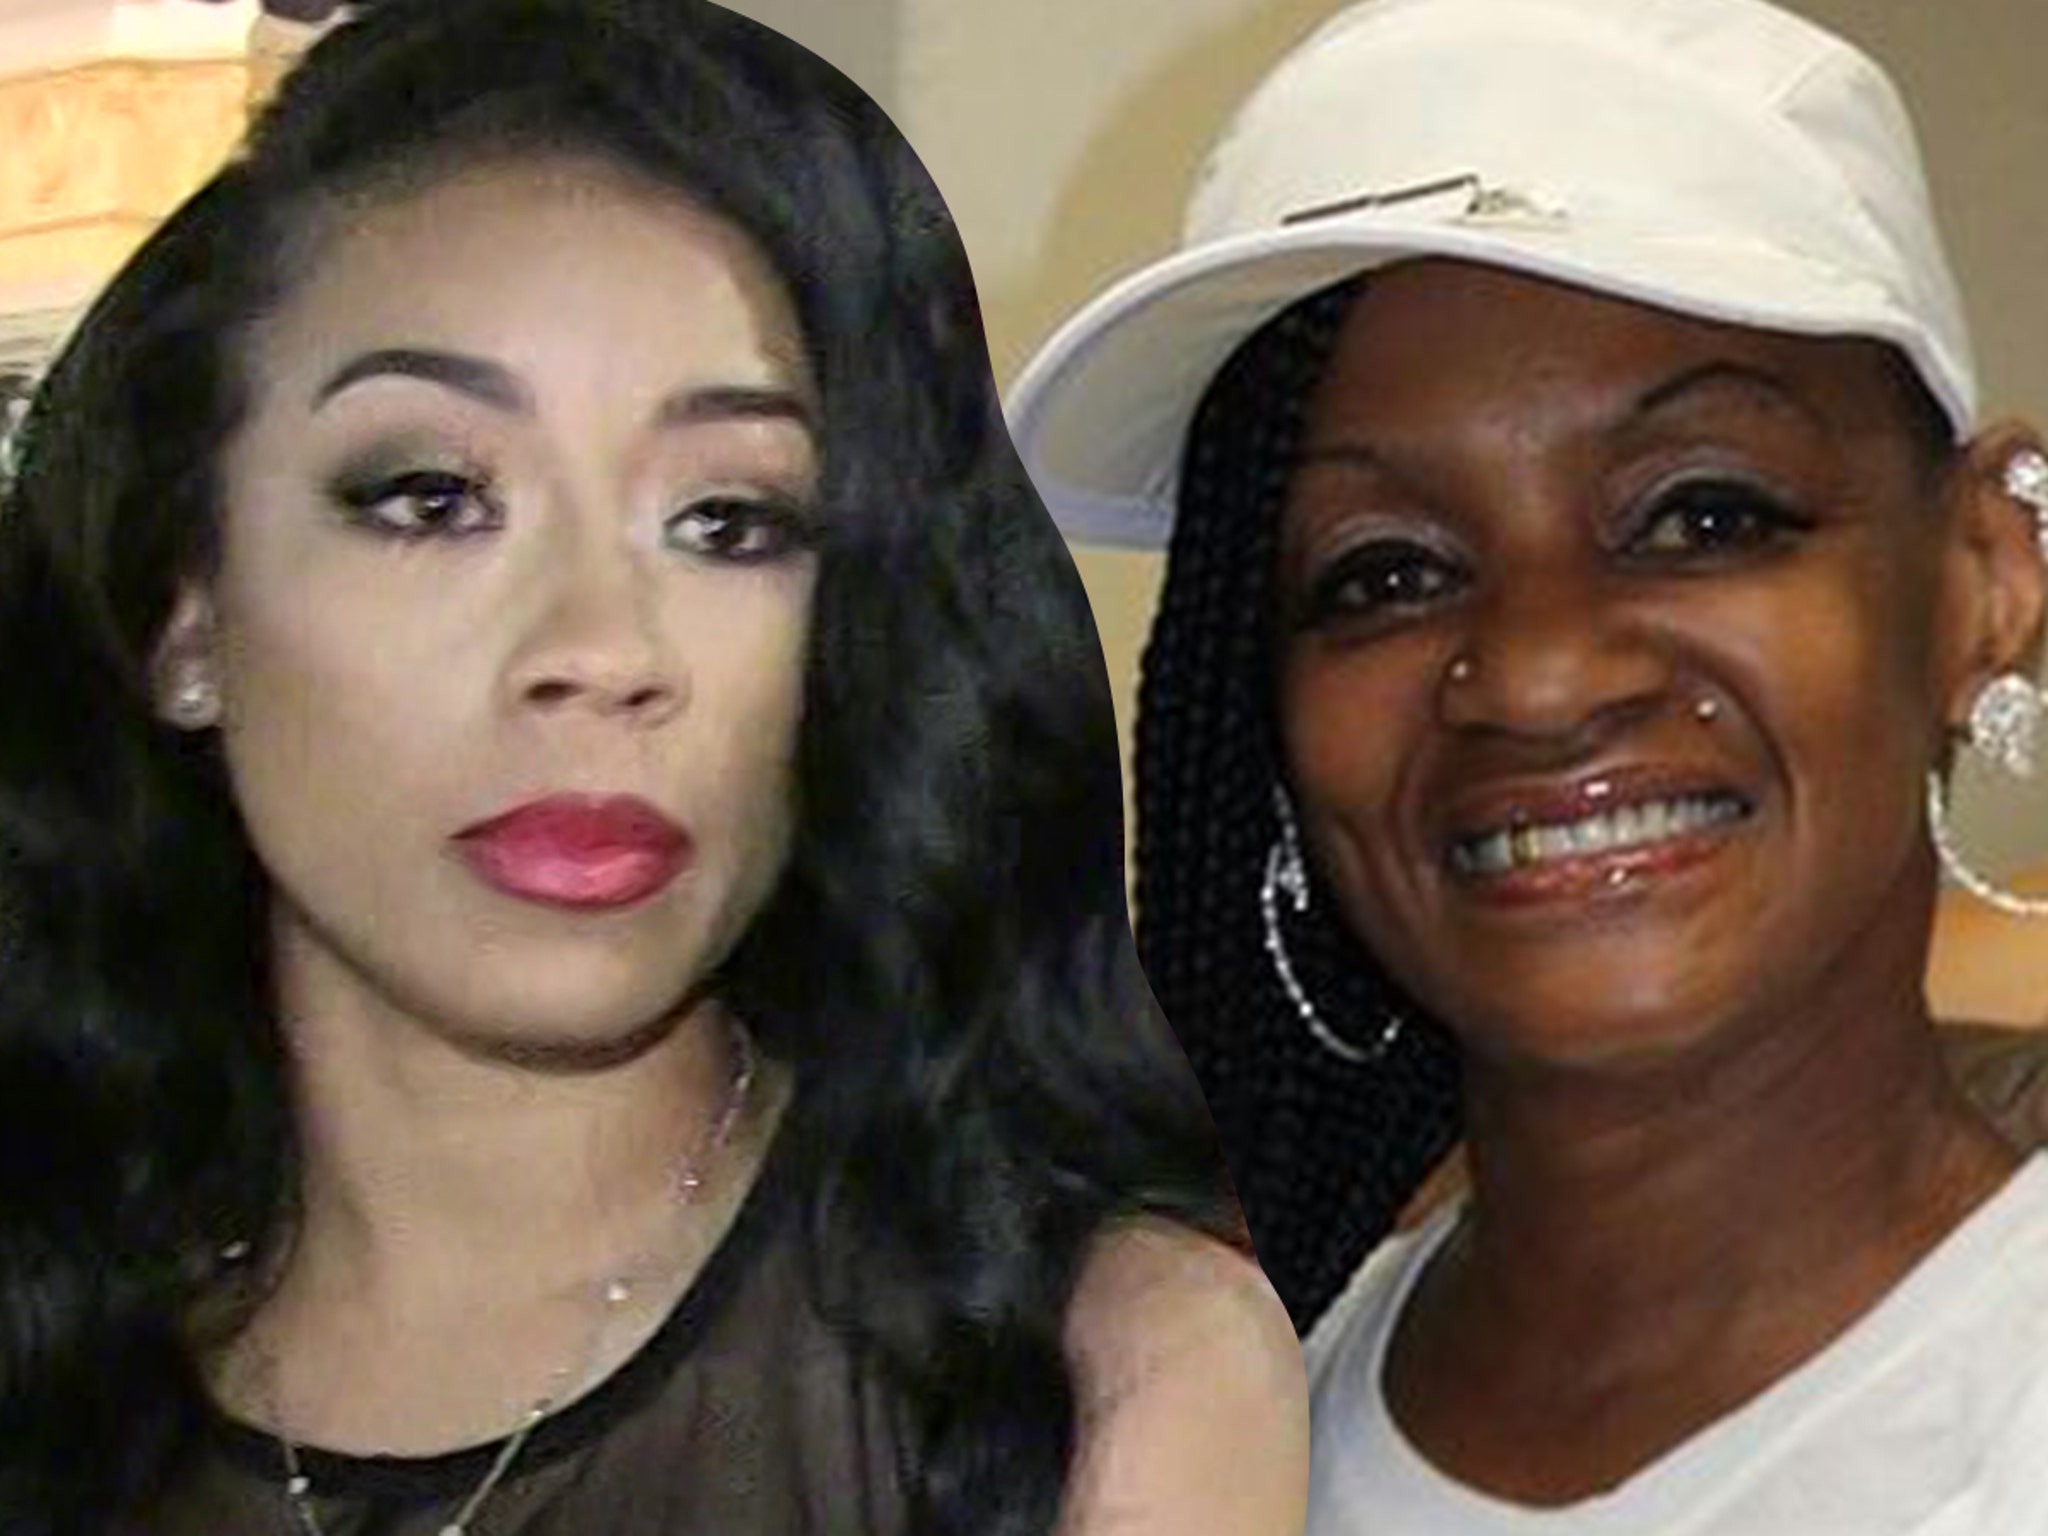 Keyshia Cole Responds To Critic Claiming She's 'Degrading' Her Late Mother  w/ Upcoming Biopic: I Wanted The Best For My Mom - theJasmineBRAND